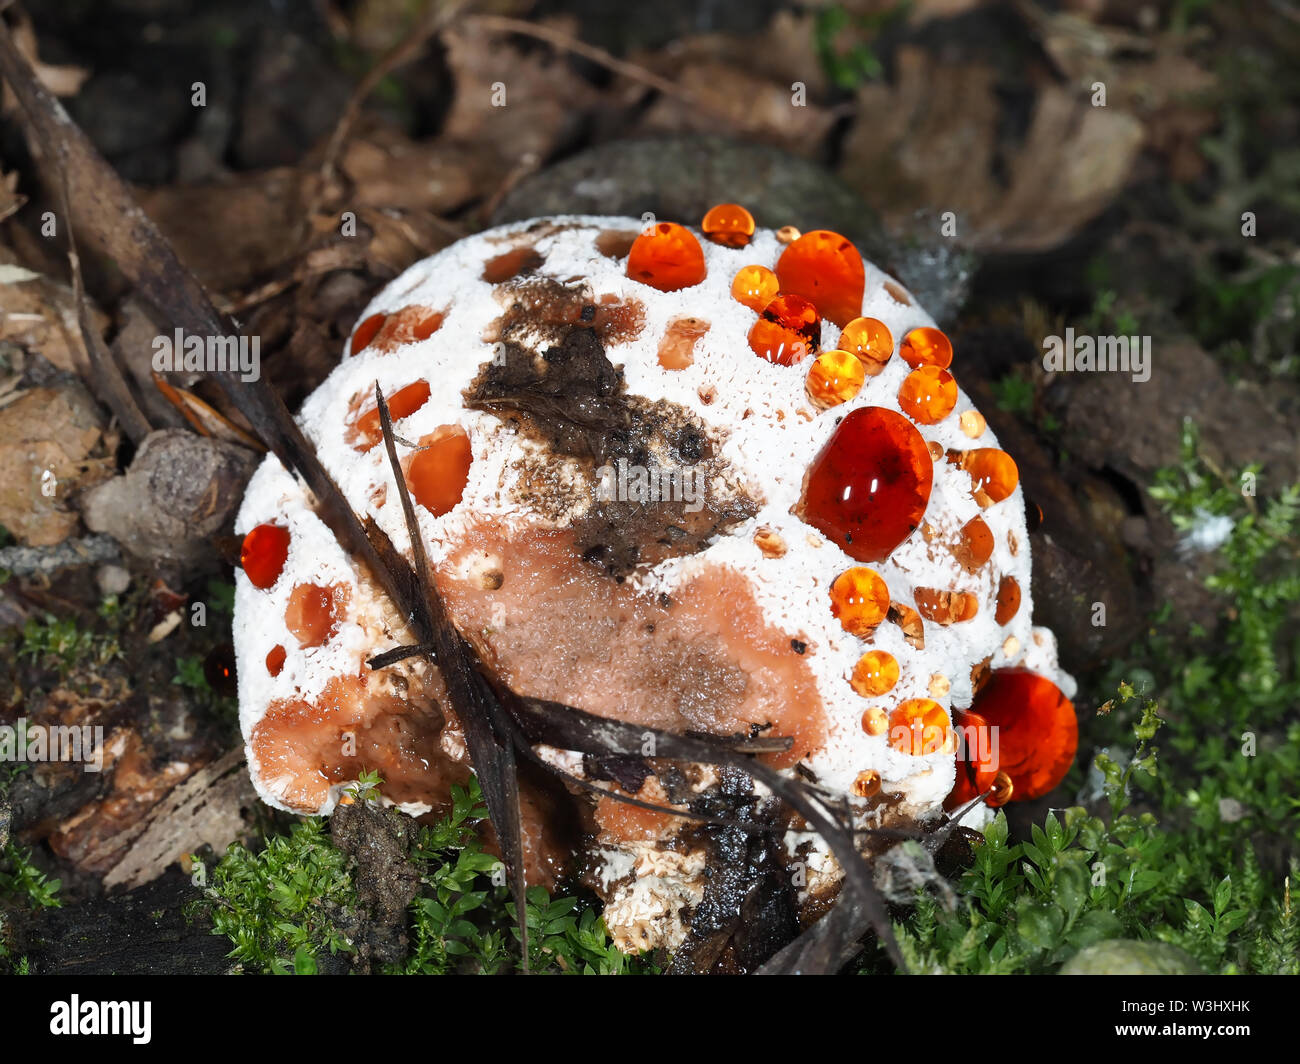 Hydnellum peckii (or very closely related mushroom) in a forest in Washington state, USA Stock Photo